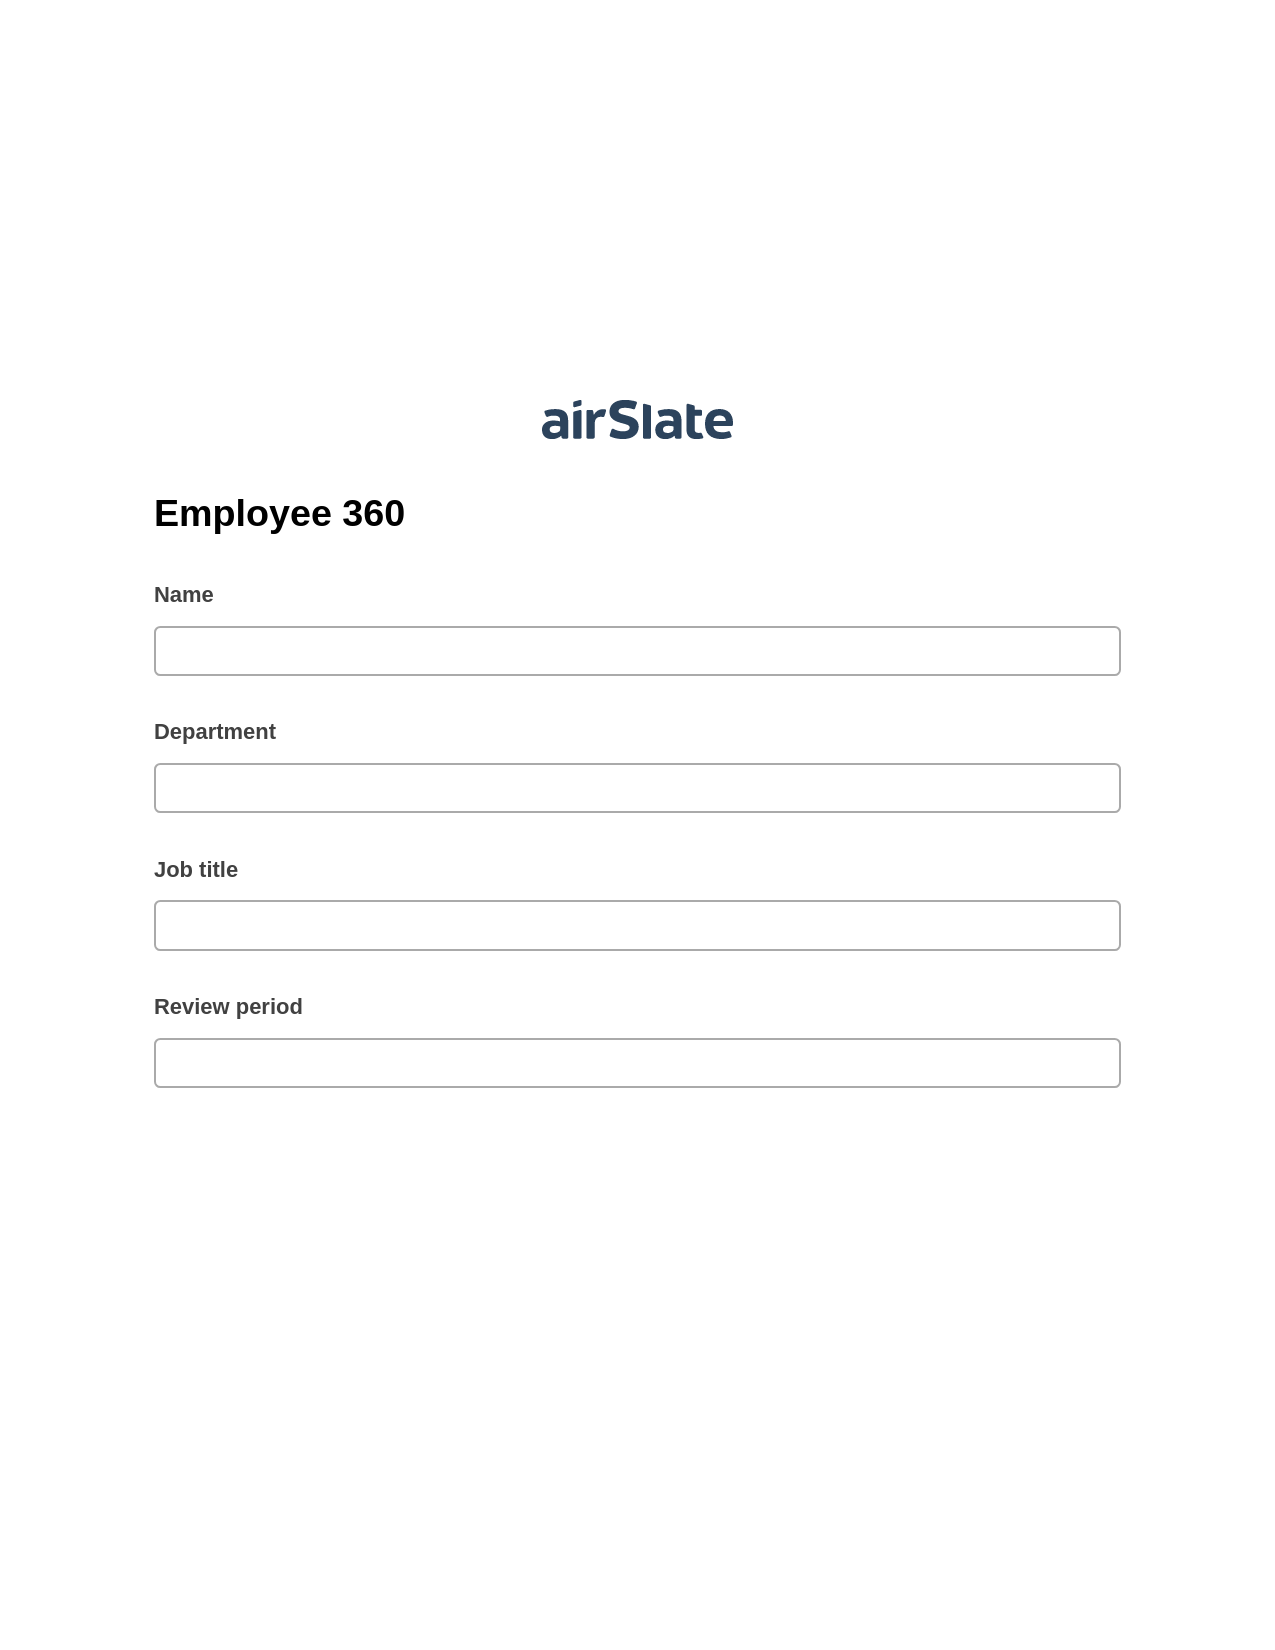 Multirole Employee 360 Pre-fill from CSV File Bot, Create slate addon, Archive to Google Drive Bot